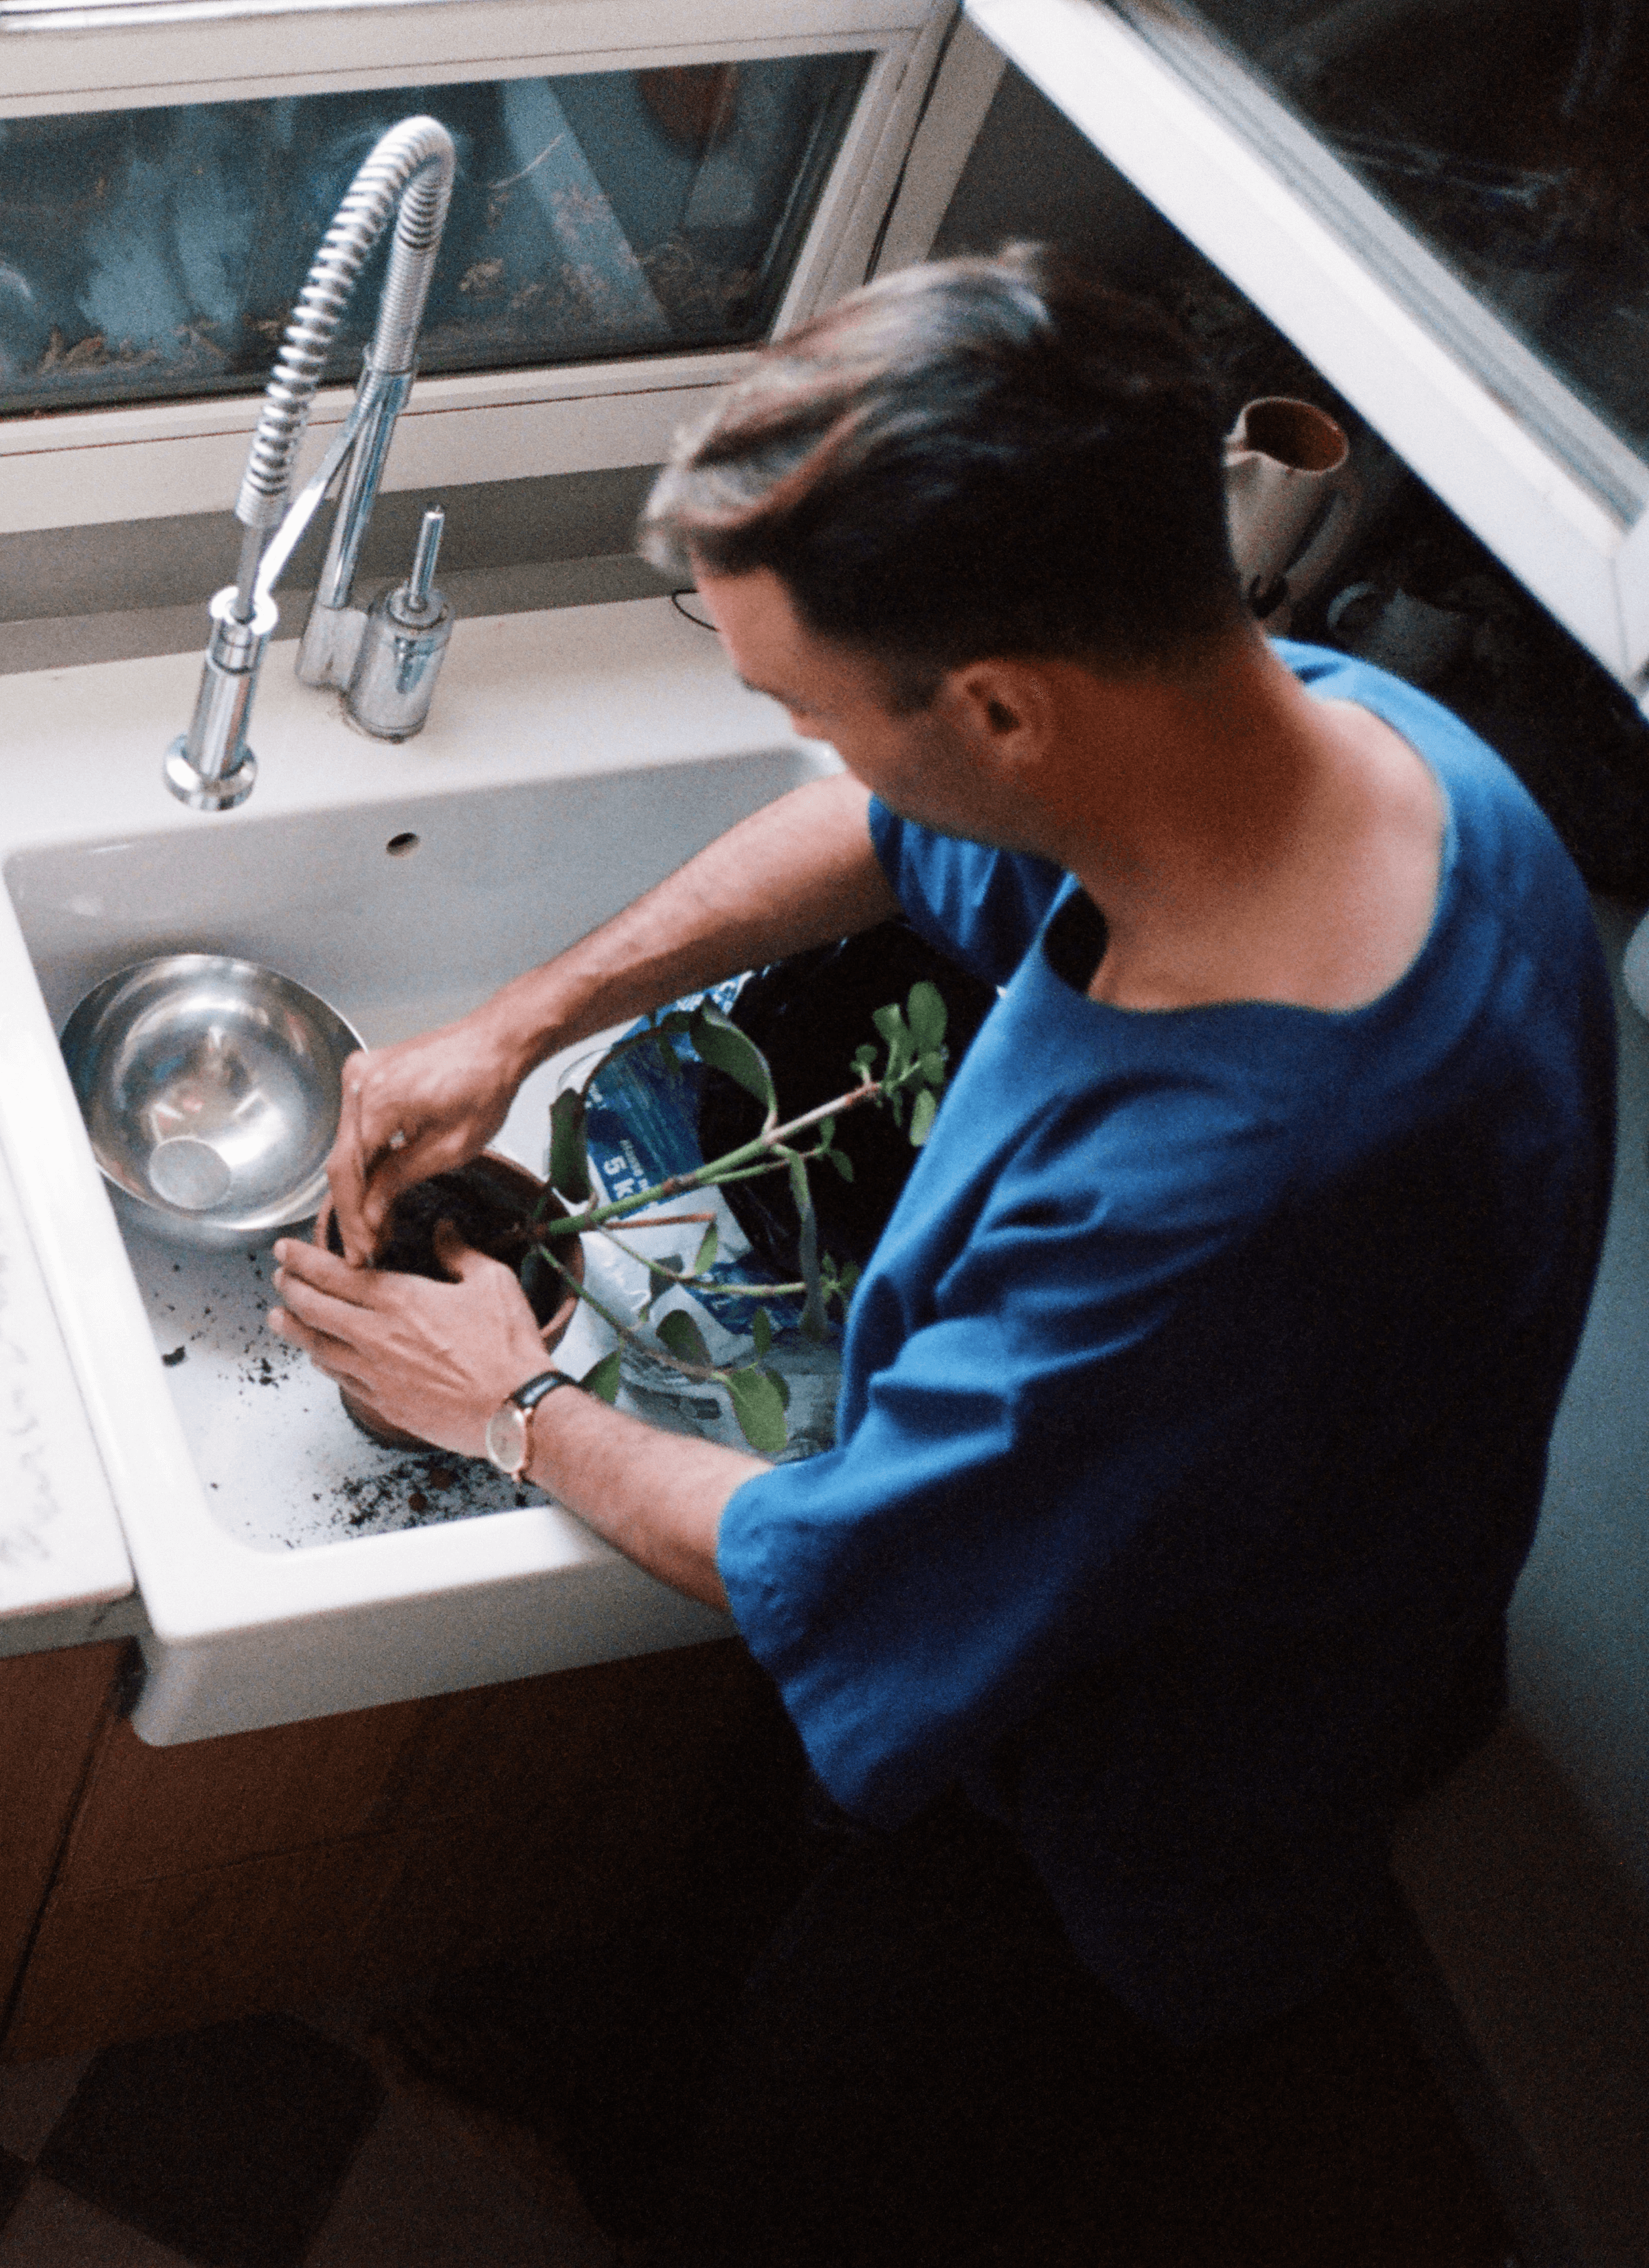 Fred in a blue T-shirt, repotting the plant in the sink and there’s a silver container next to the pot.